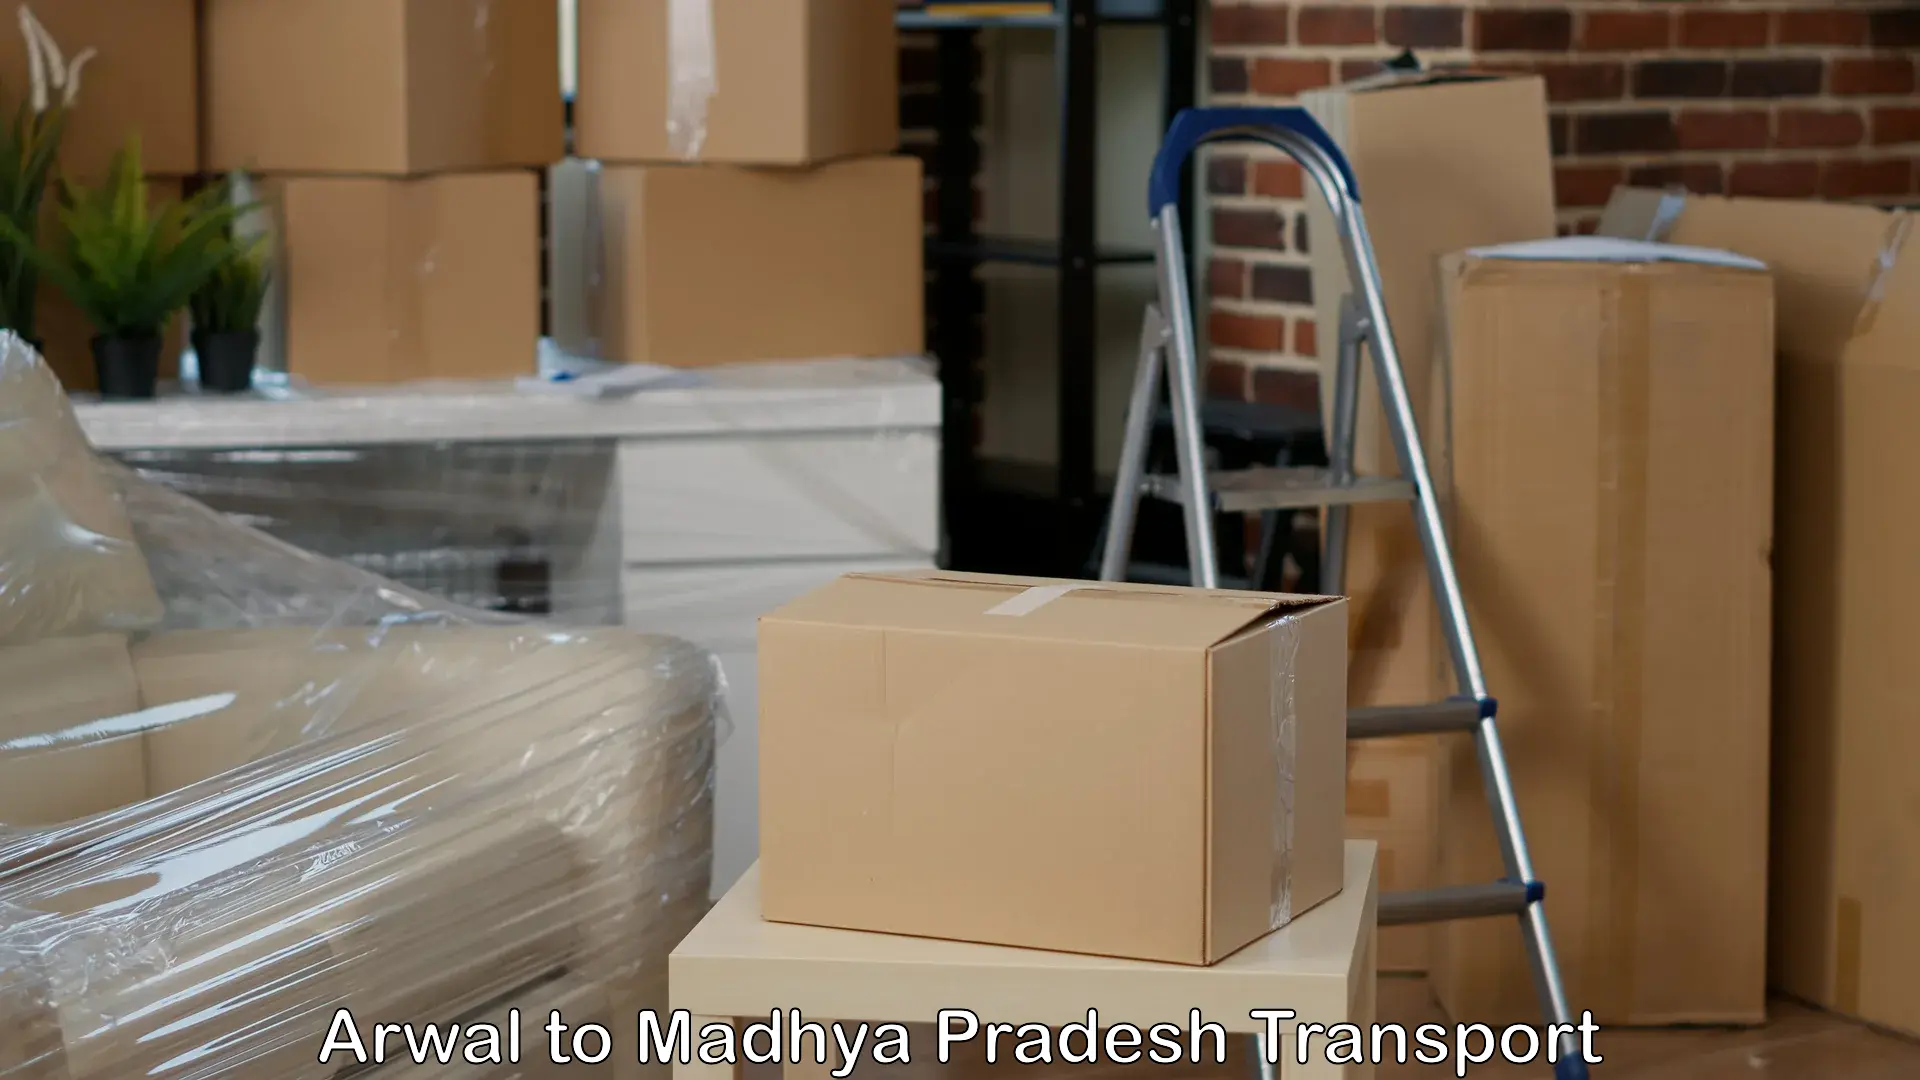 Truck transport companies in India Arwal to Rajgarh